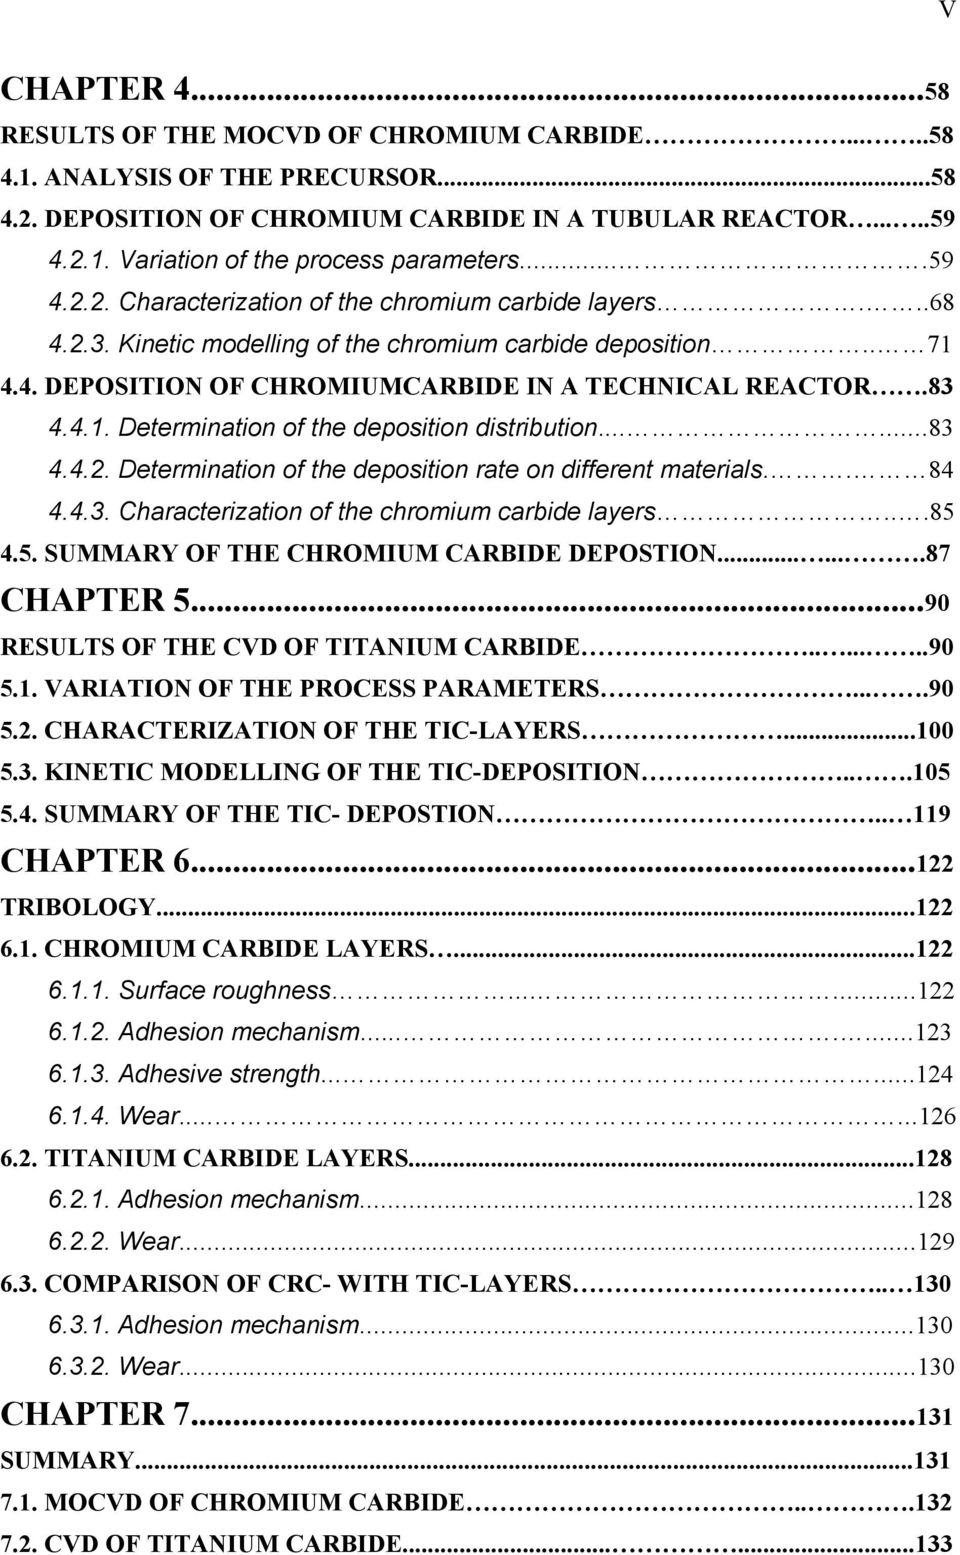 .....83 4.4.2. Determination of the deposition rate on different materials.. 84 4.4.3. Characterization of the chromium carbide layers...85 4.5. SUMMARY OF THE CHROMIUM CARBIDE DEPOSTION.......87 CHAPTER 5.